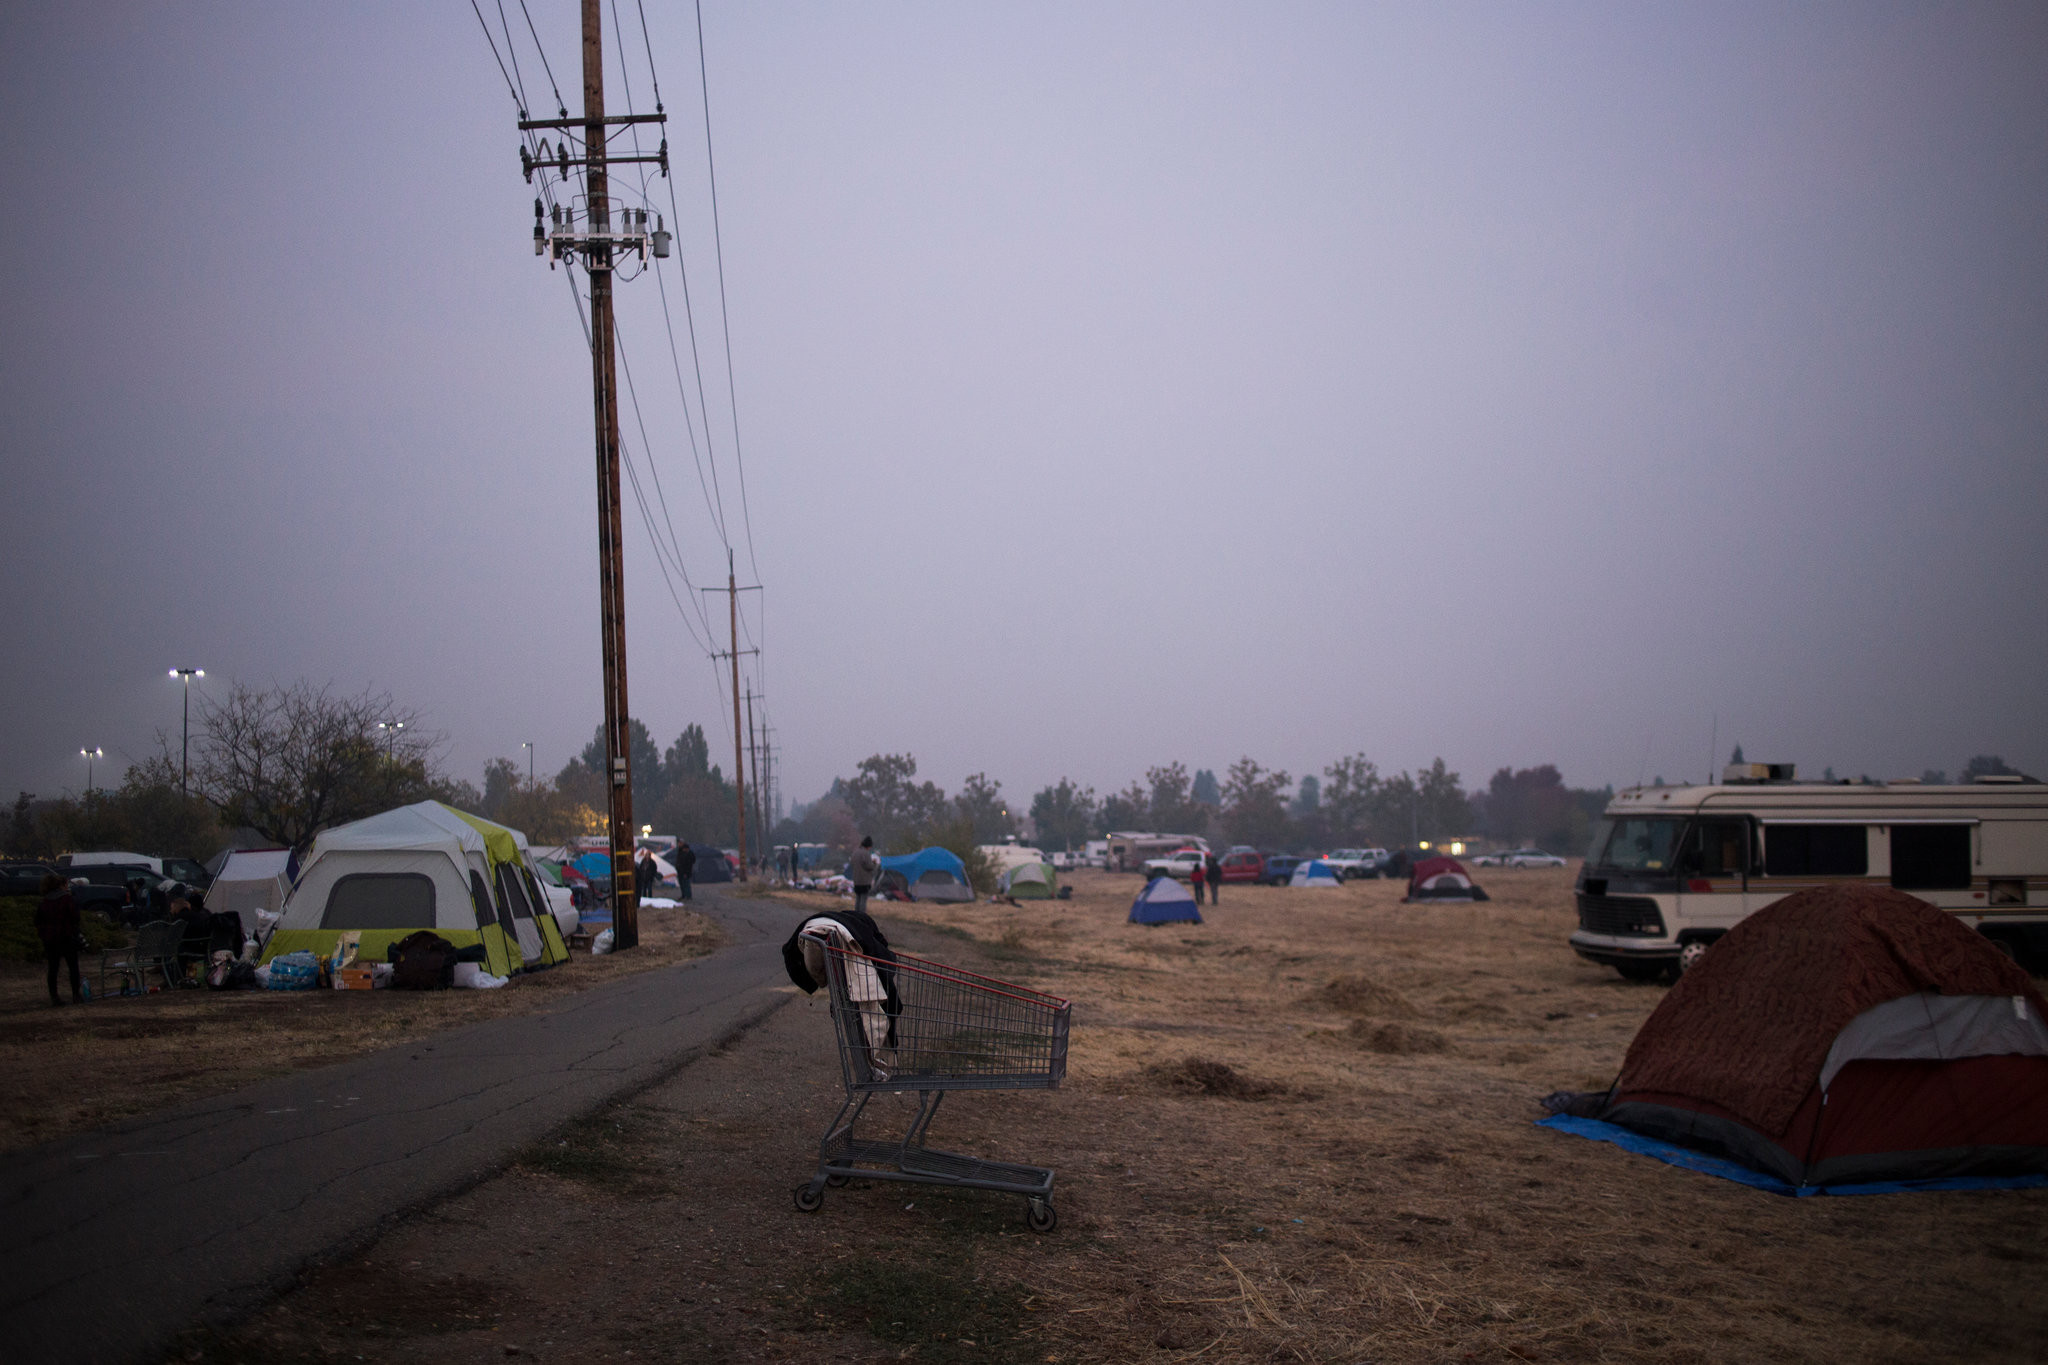 Tent city Chico after Paradise fire